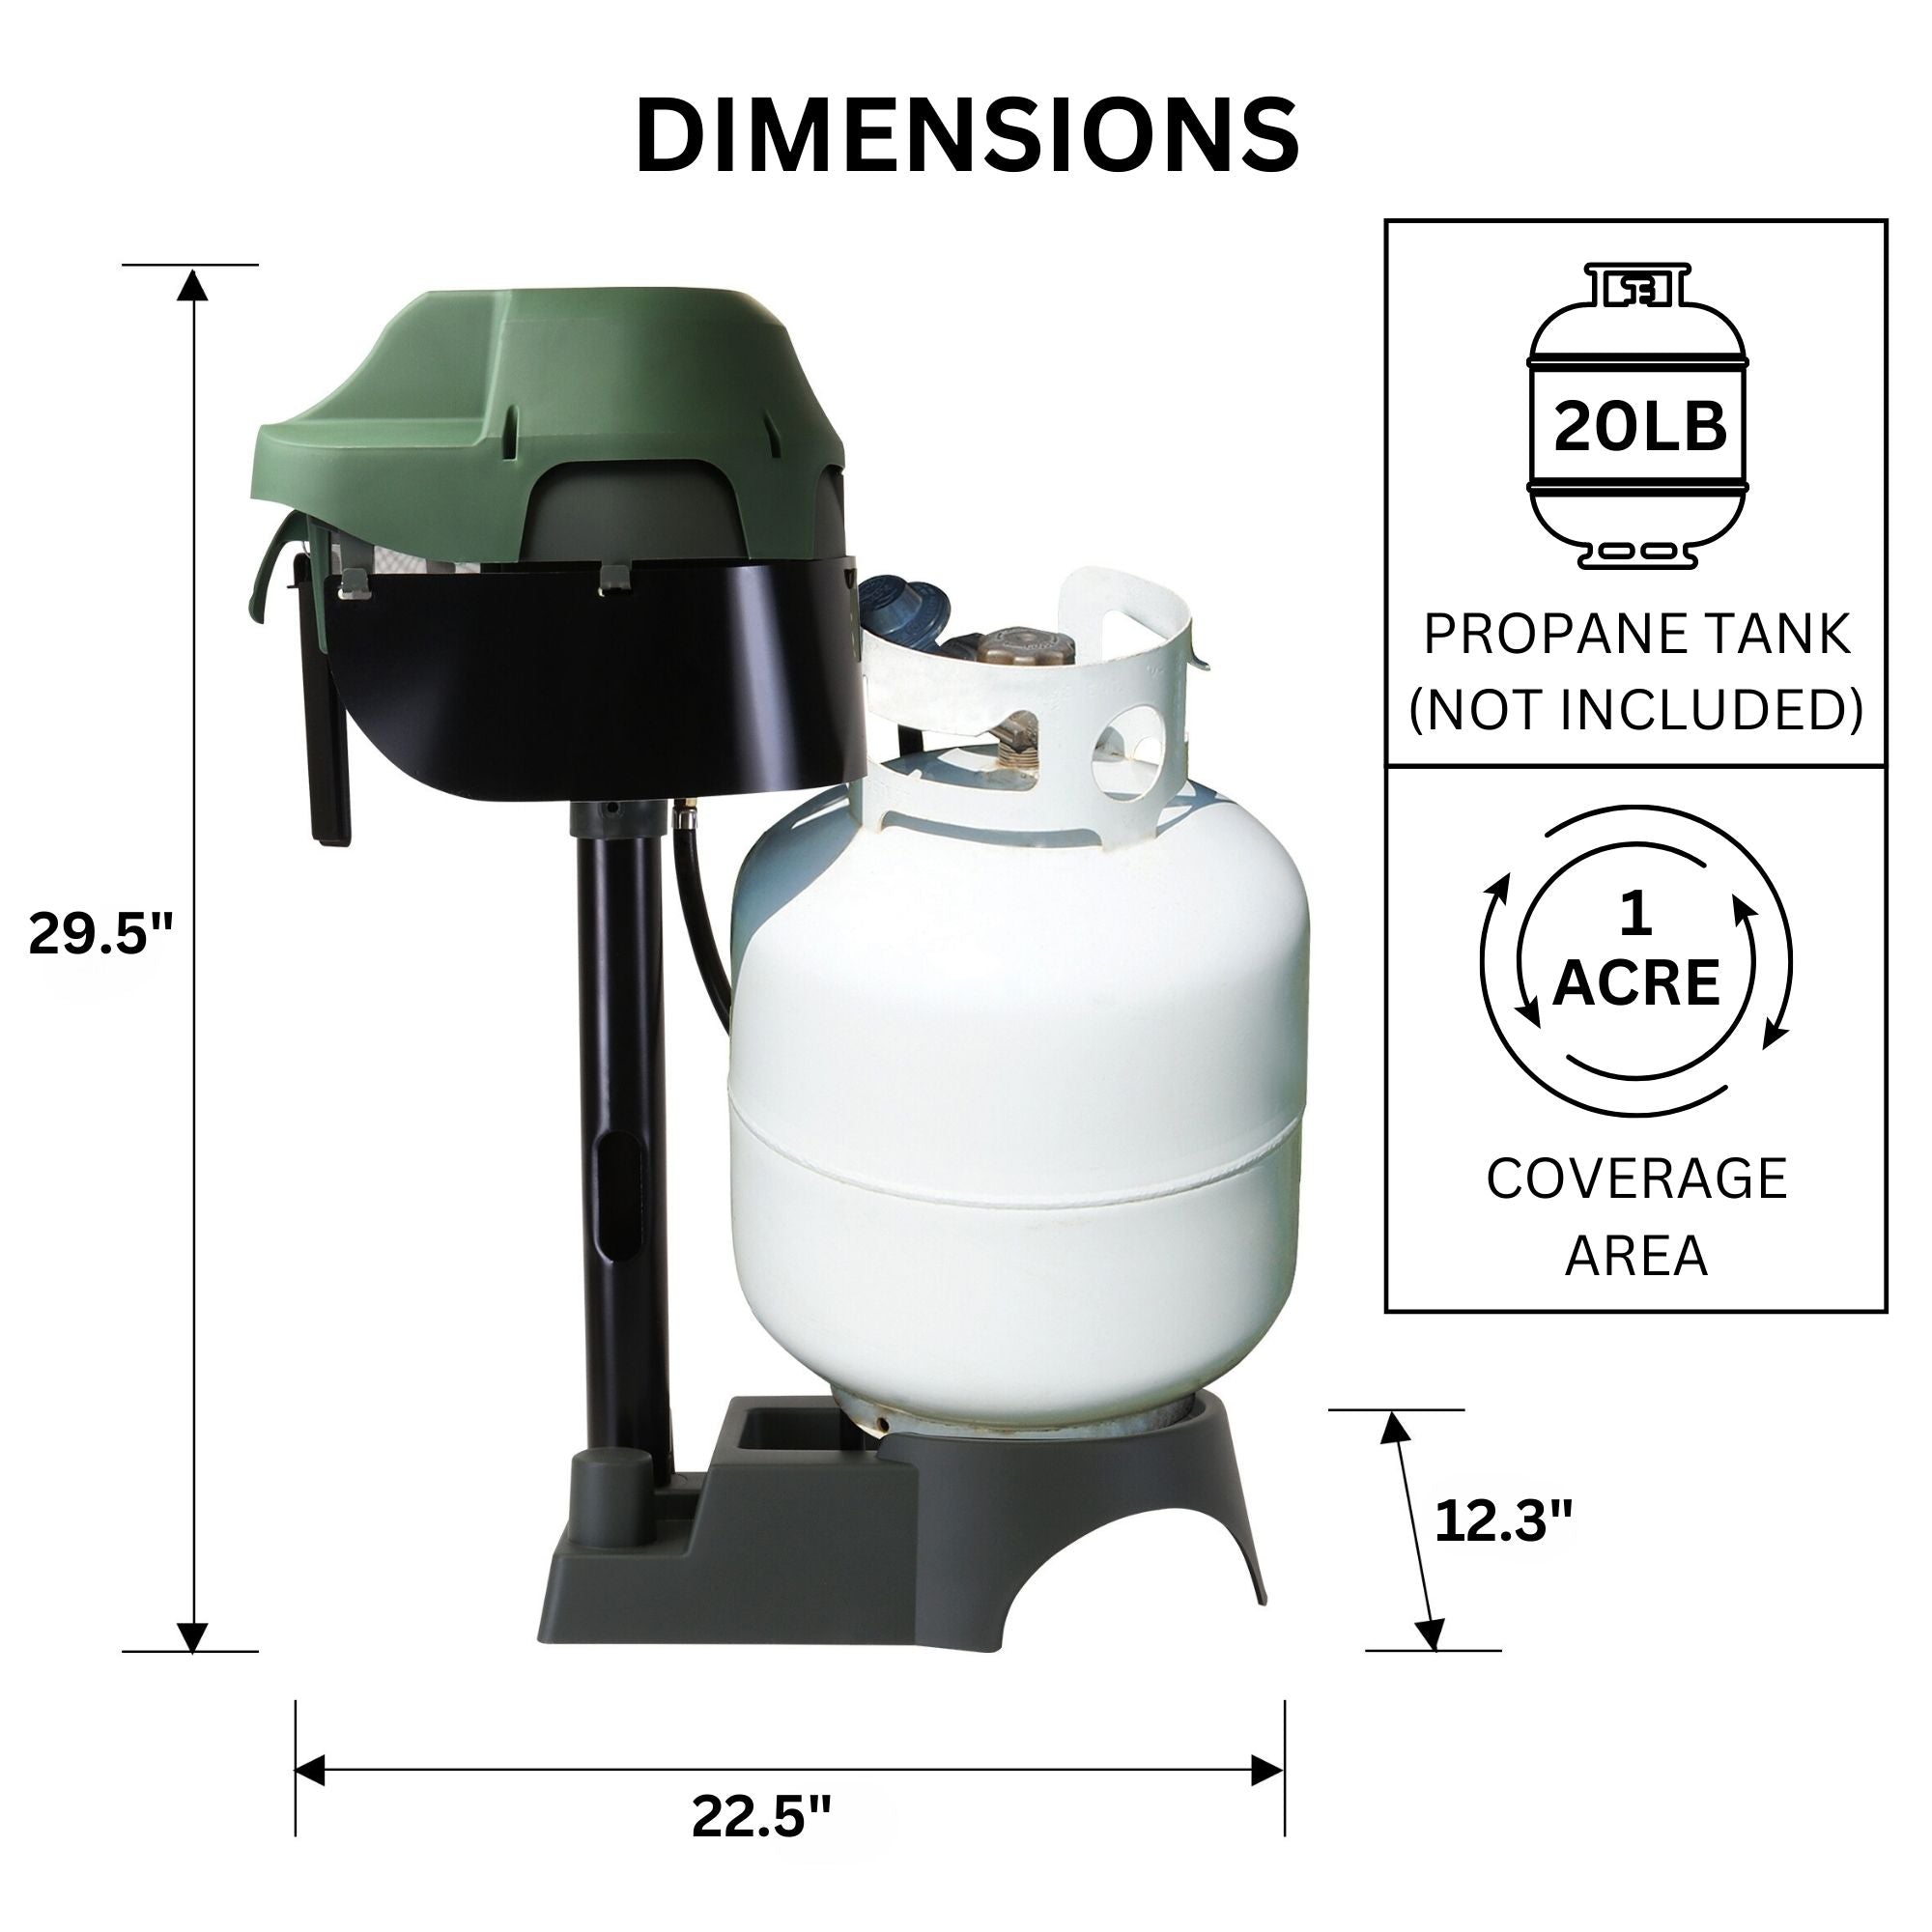 Product shot of Bite Shield cordless 1 acre mosquito eliminator on a white background with dimensions labeled. Text and icons to the right read, "20 lb propane tank (not included); 1 acre coverage area"